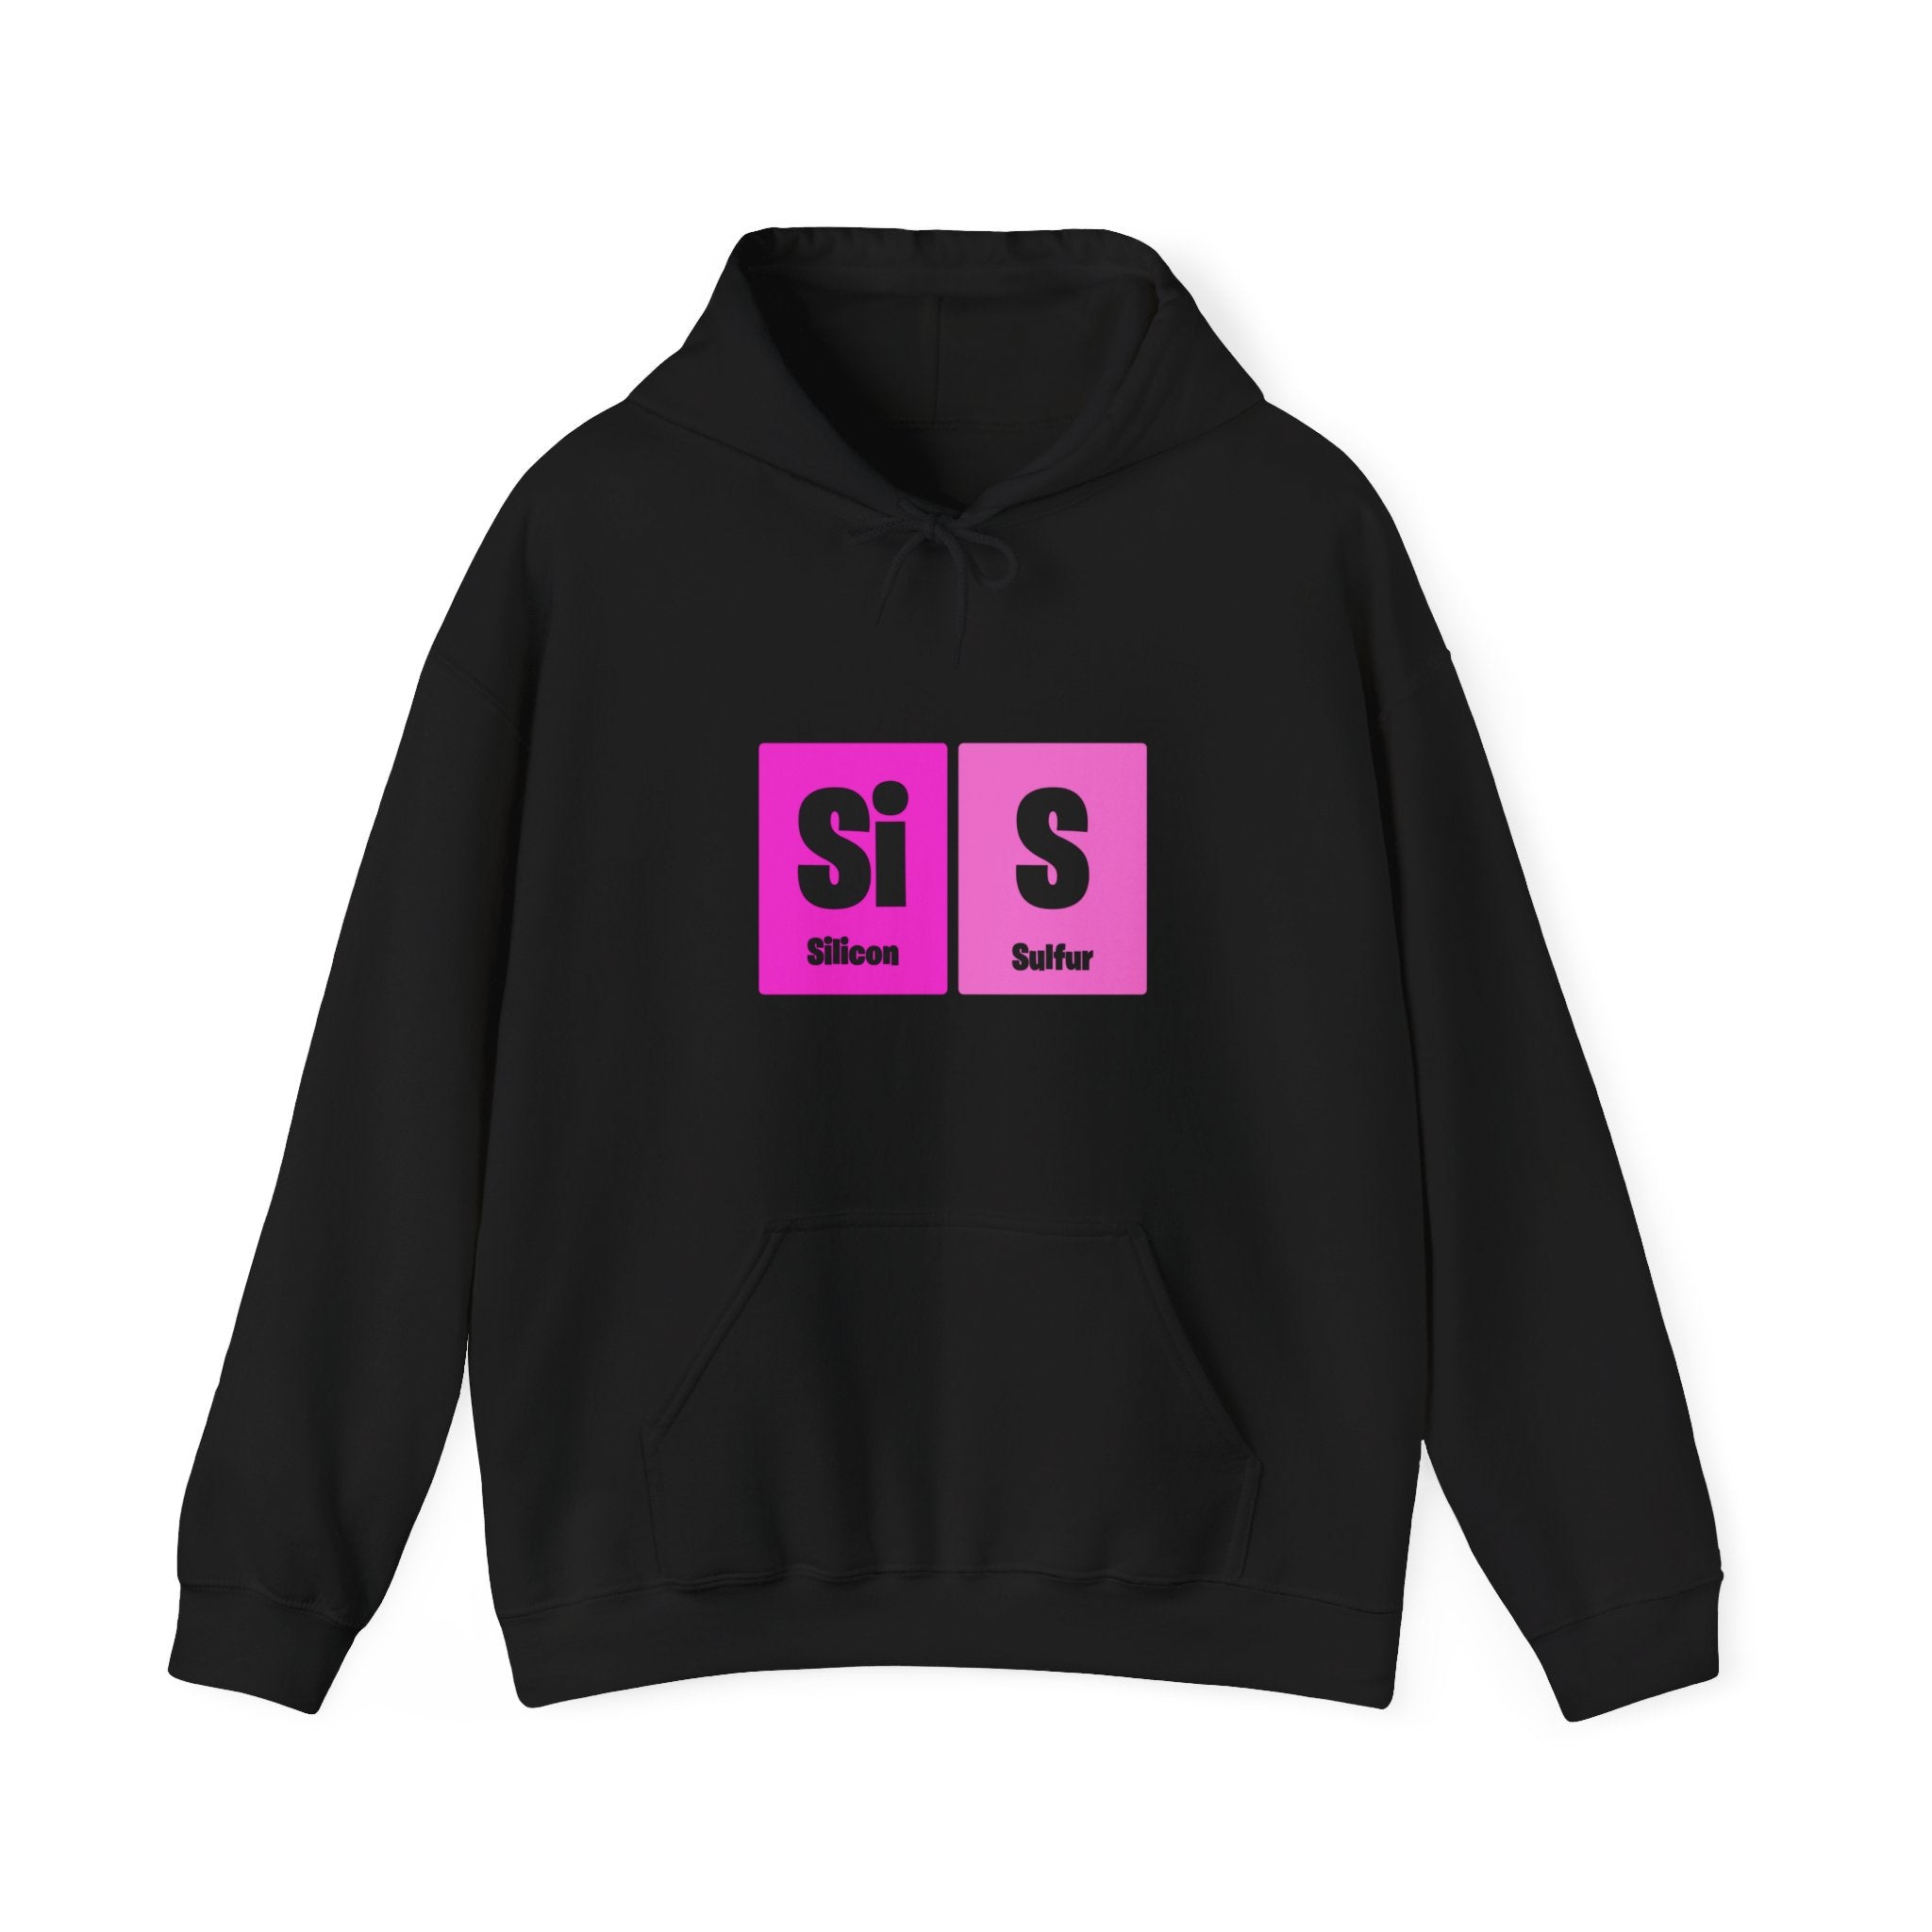 A black Si-S Light Pendant - Hooded Sweatshirt featuring pink periodic table elements for Silicon (Si) and Sulfur (S) printed on the front, inspired by Si-S pendant designs.